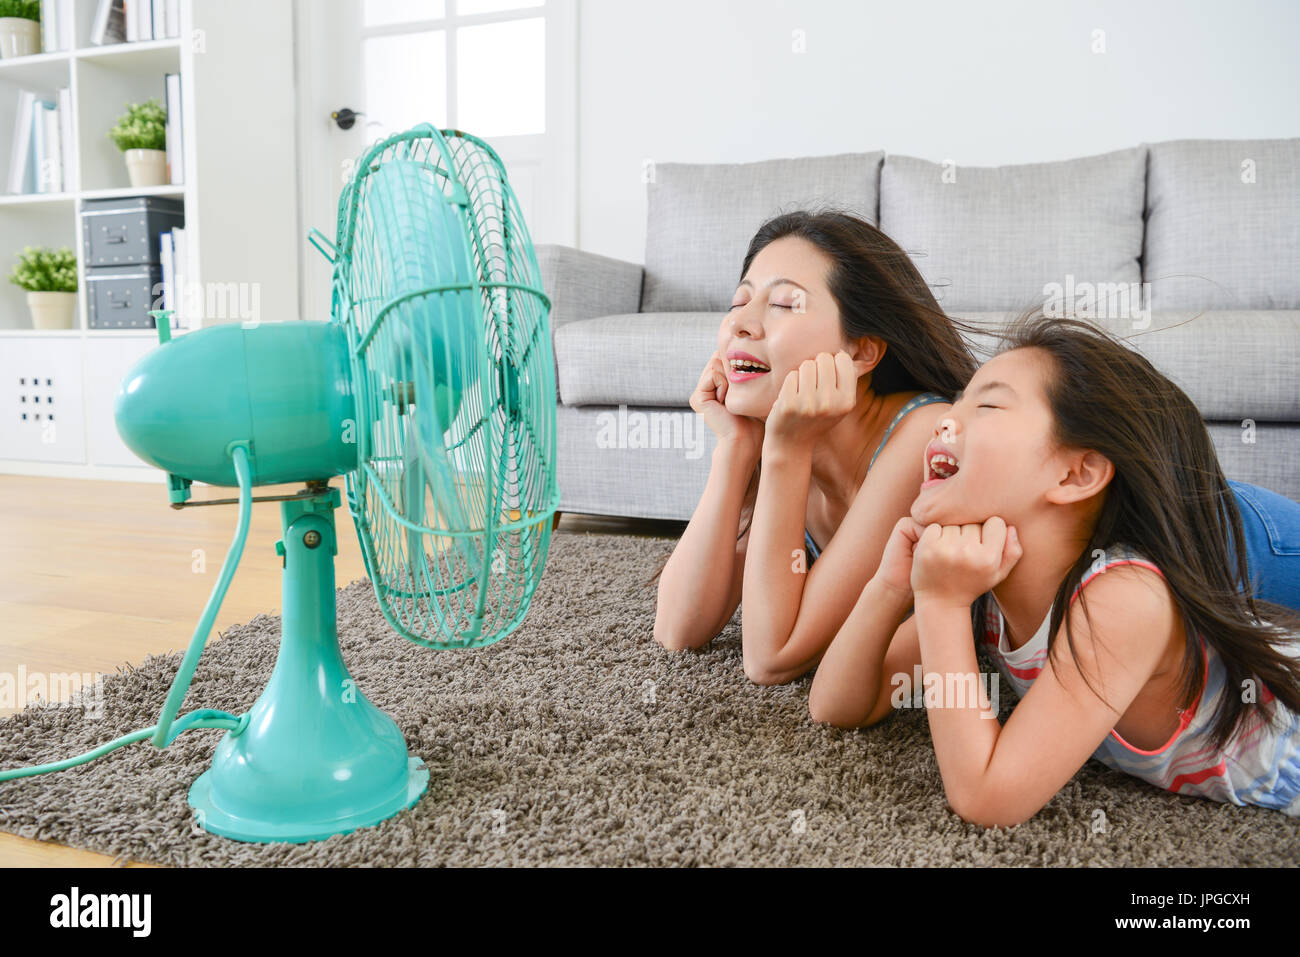 pleasantly mother with young little daughter lying down on living room floor and face to electric fan enjoying blowing cool wind together at summer. Stock Photo